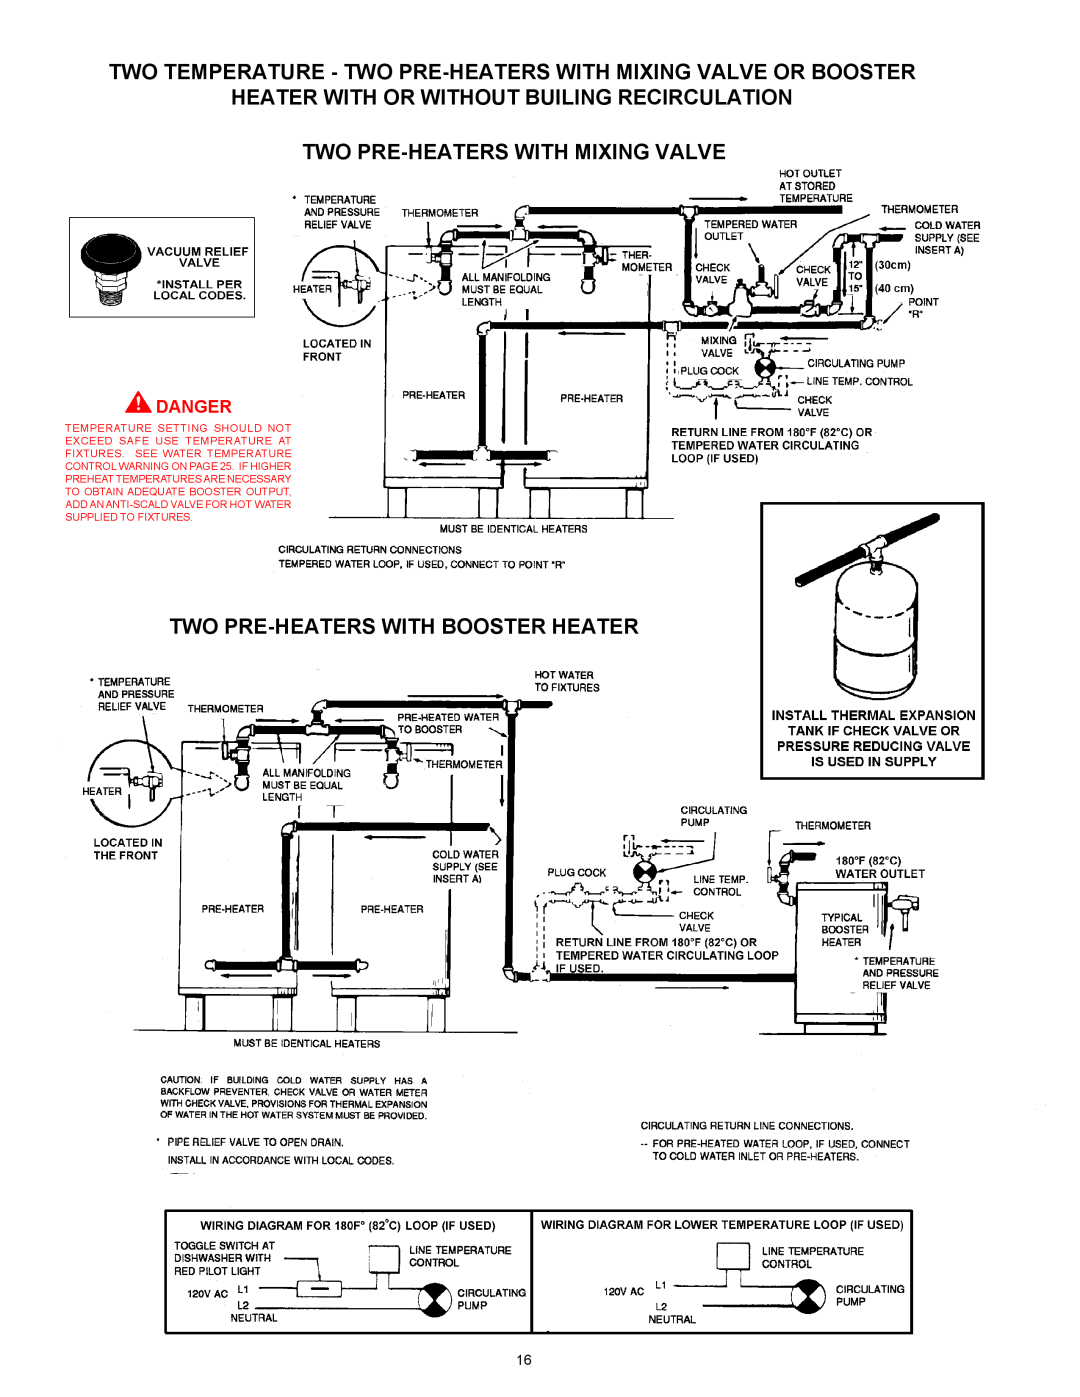 American Water Heater BCG3-80T150-6NOX warranty Two Temperature - Two Pre-Heaters With Mixing Valve Or Booster, Danger 